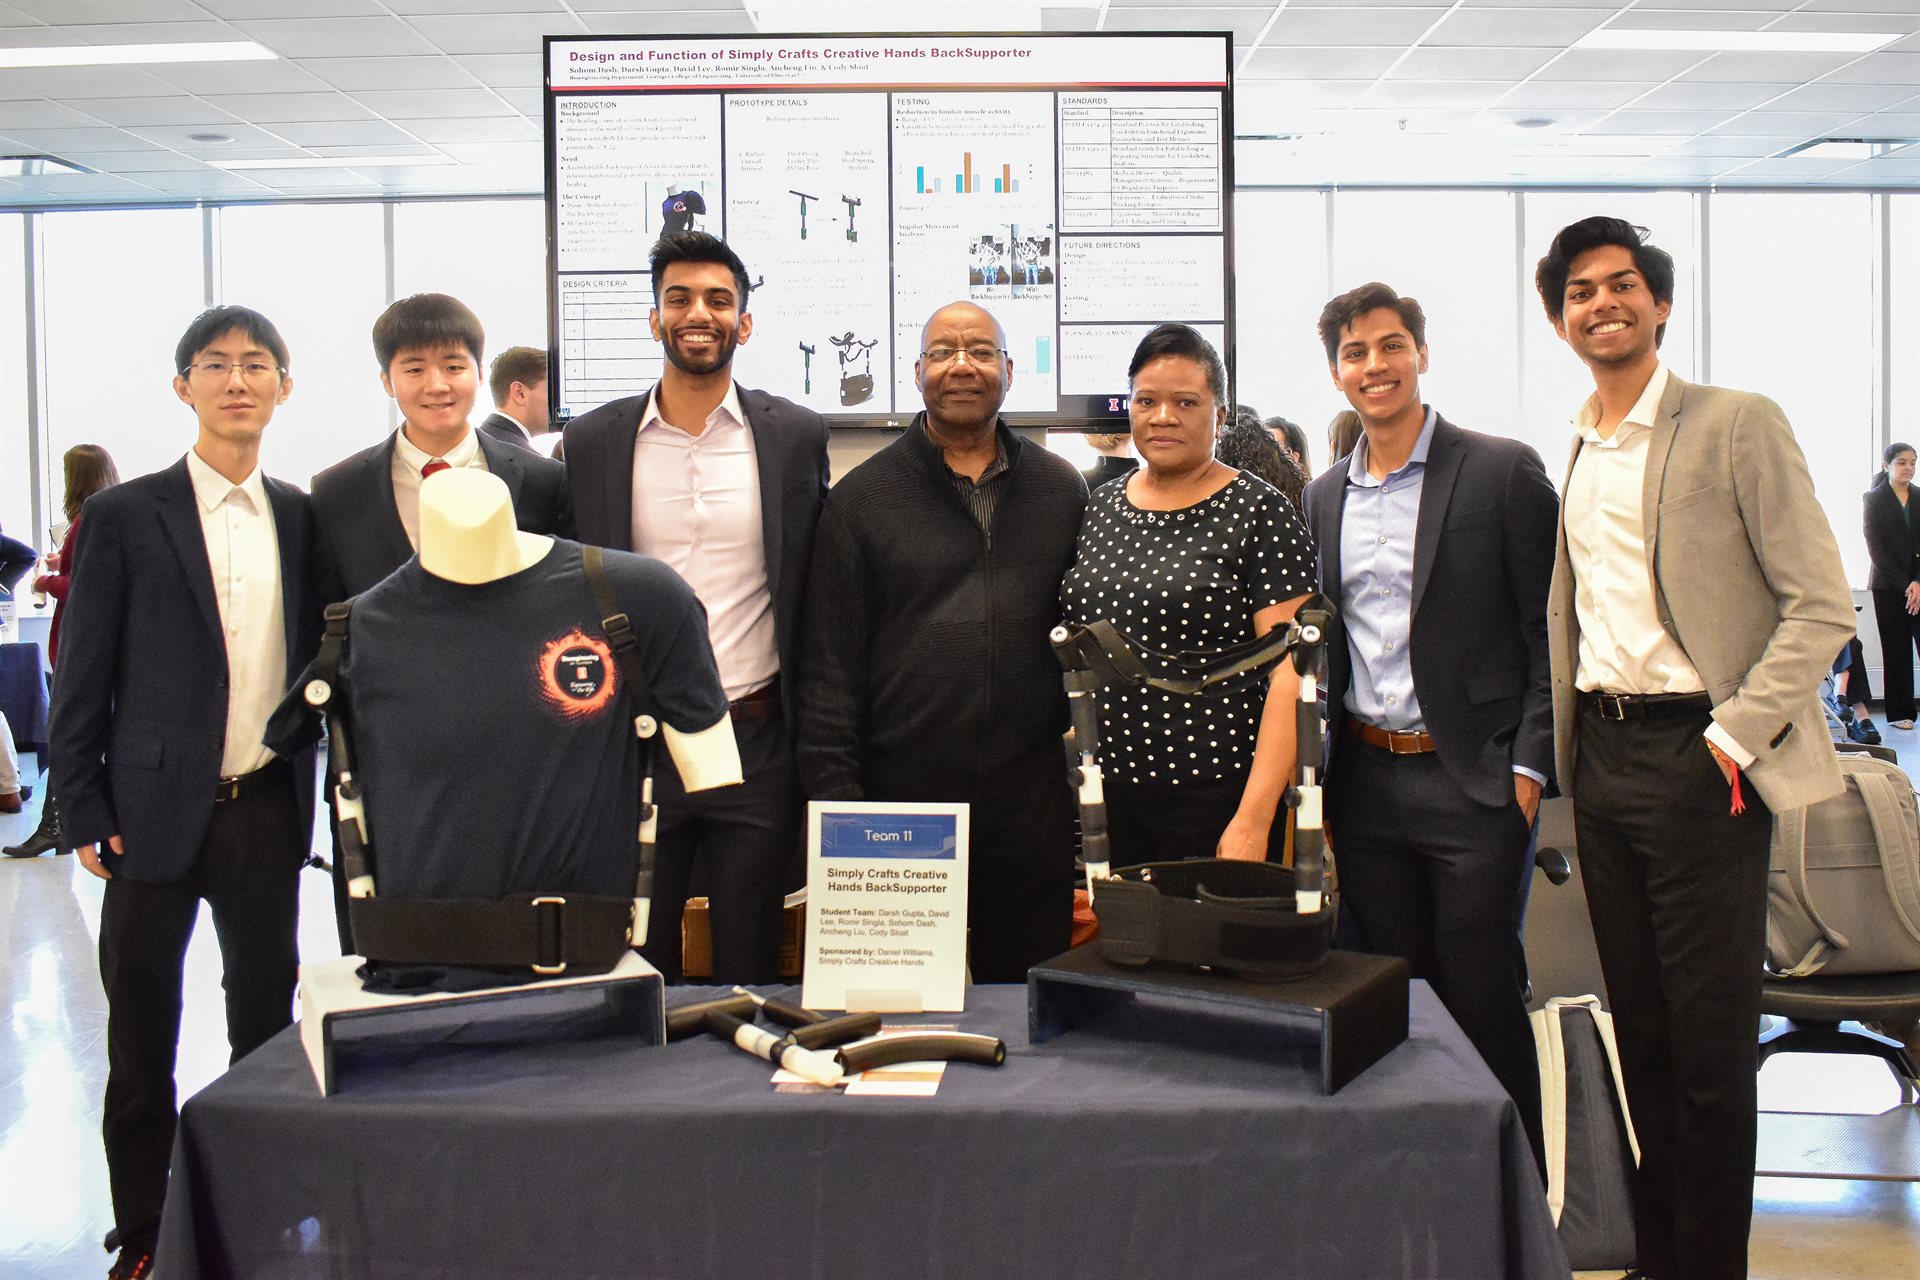 Left to right: Students Ancheng Liu, David Lee, Romir Singla, project sponsors Daniel and Sarah Williams, students&nbsp;Sohom Dash and Darsh Gupta at the capstone symposium.